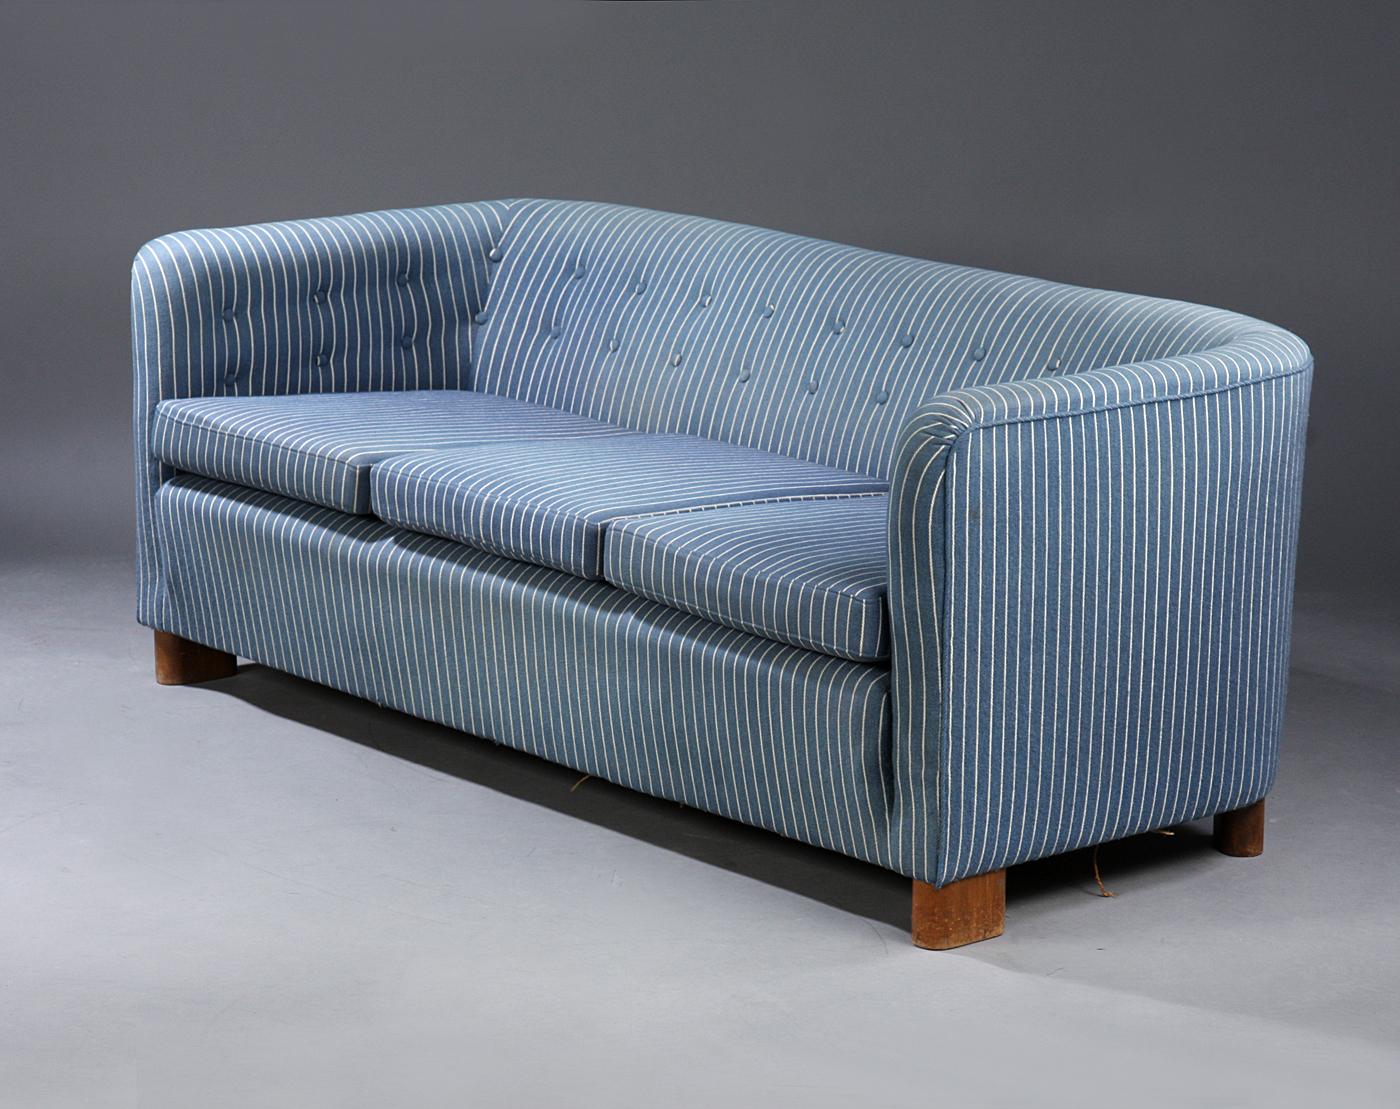 Ole Wanscher. Upholstered three-pers. Sofa upholstered in striped wool fabric, button-sewn back, loose ends, legs of stained beech wood. Measure: L. 180 cm. Produced by Fritz Hansen, model 1668, stamped with FH (Fritz Hansen) under the girth of the